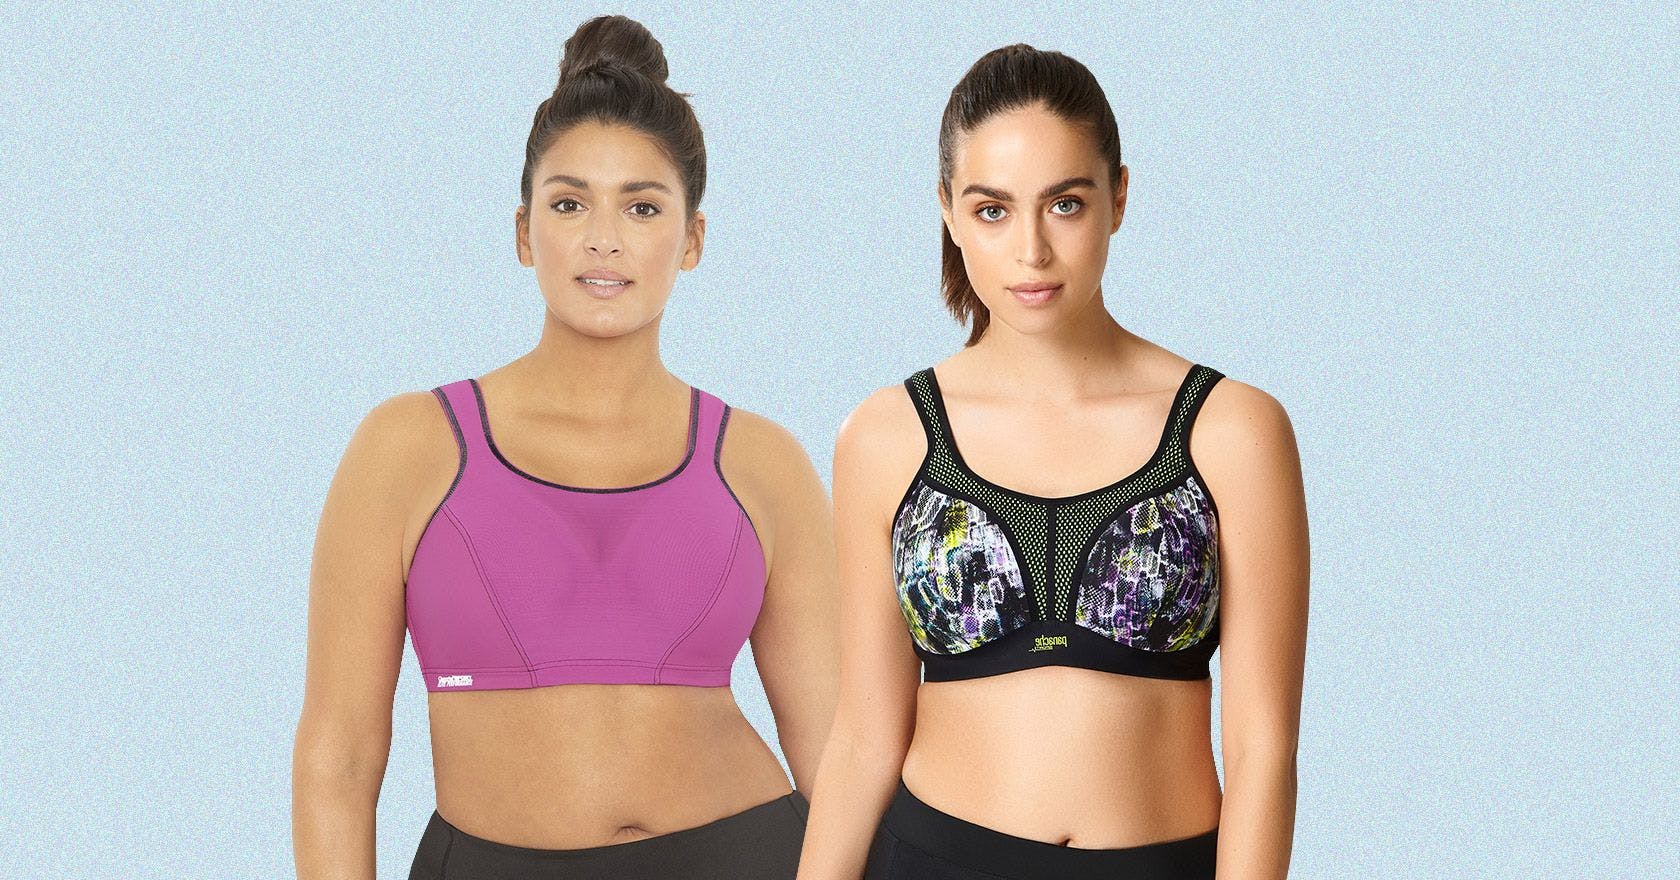 Goirls with big boobs at gym Sports Bras 11 Best Supportive Sports Bras For Bigger Boobs